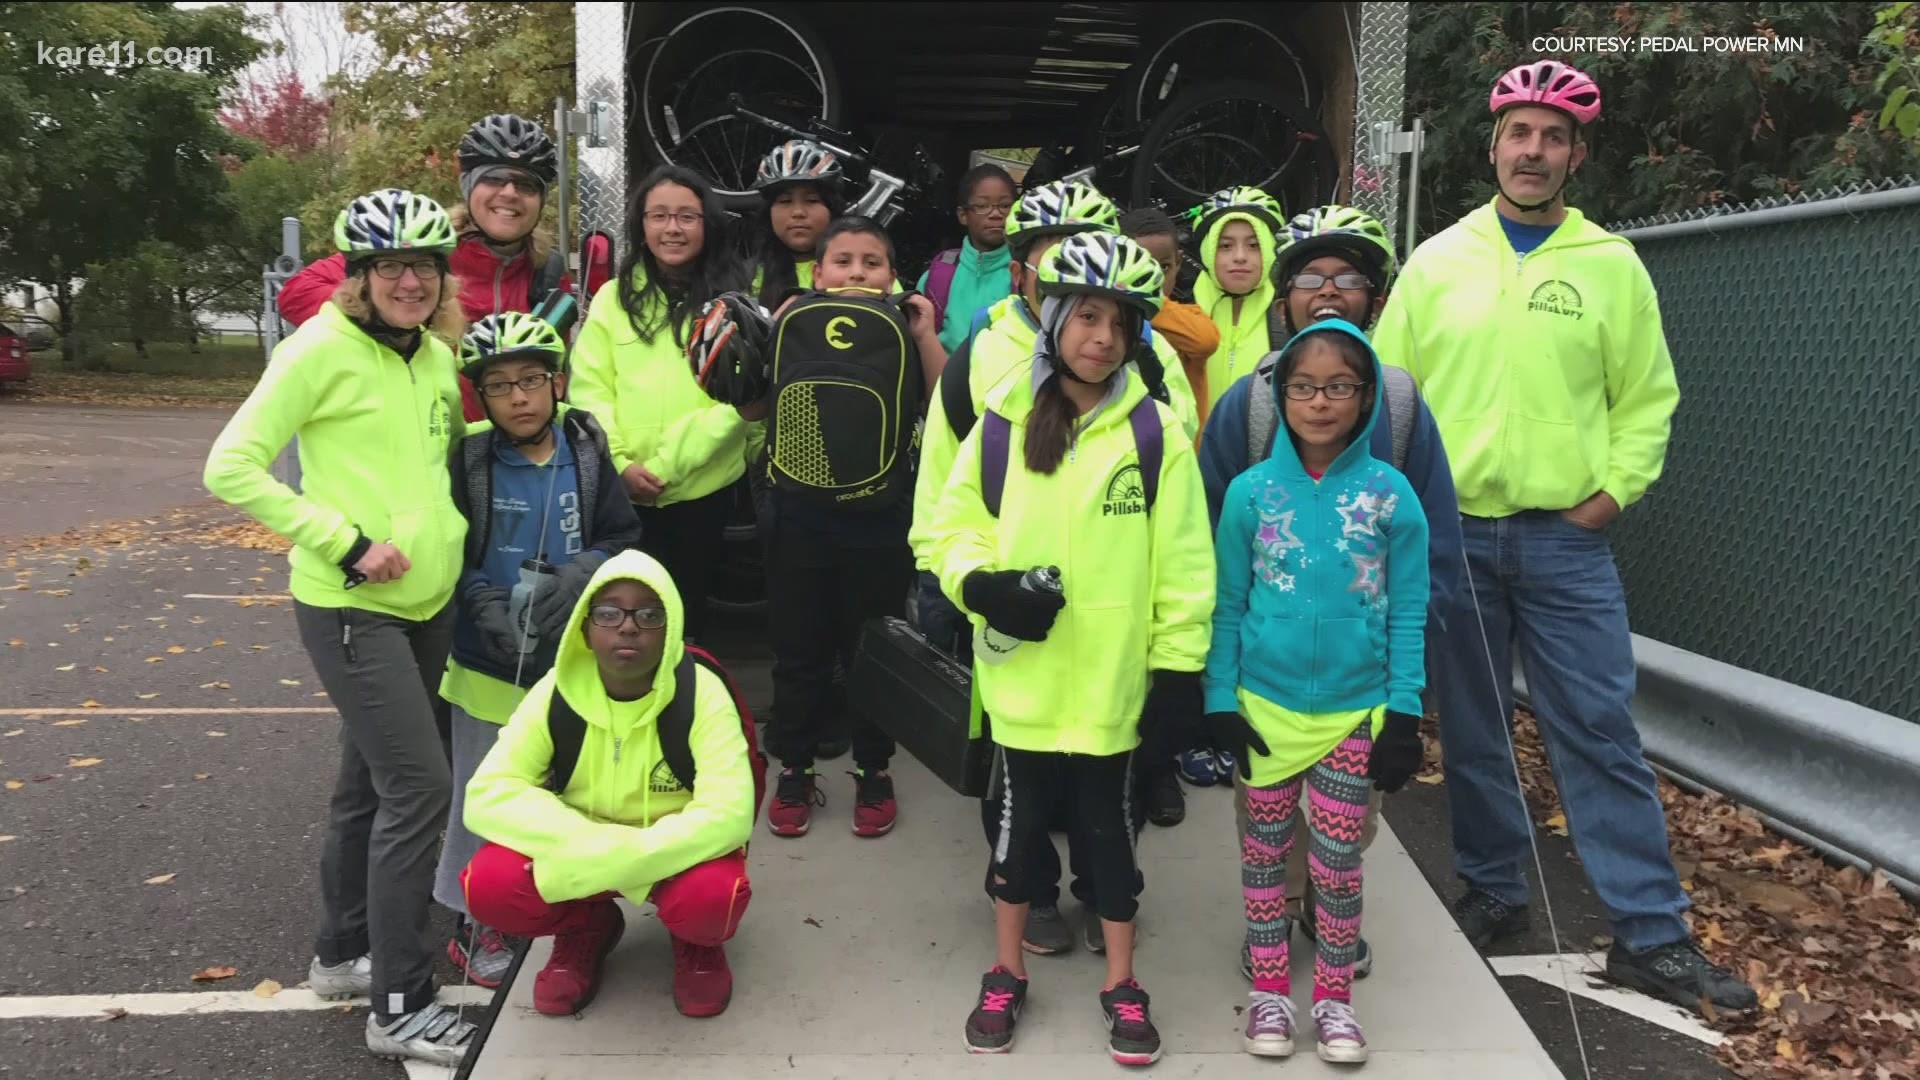 "After what all the kids in Minneapolis have been through this year, that's just so hard to hear about that," said Mark Trumper, Pedal Power MN co-founder.